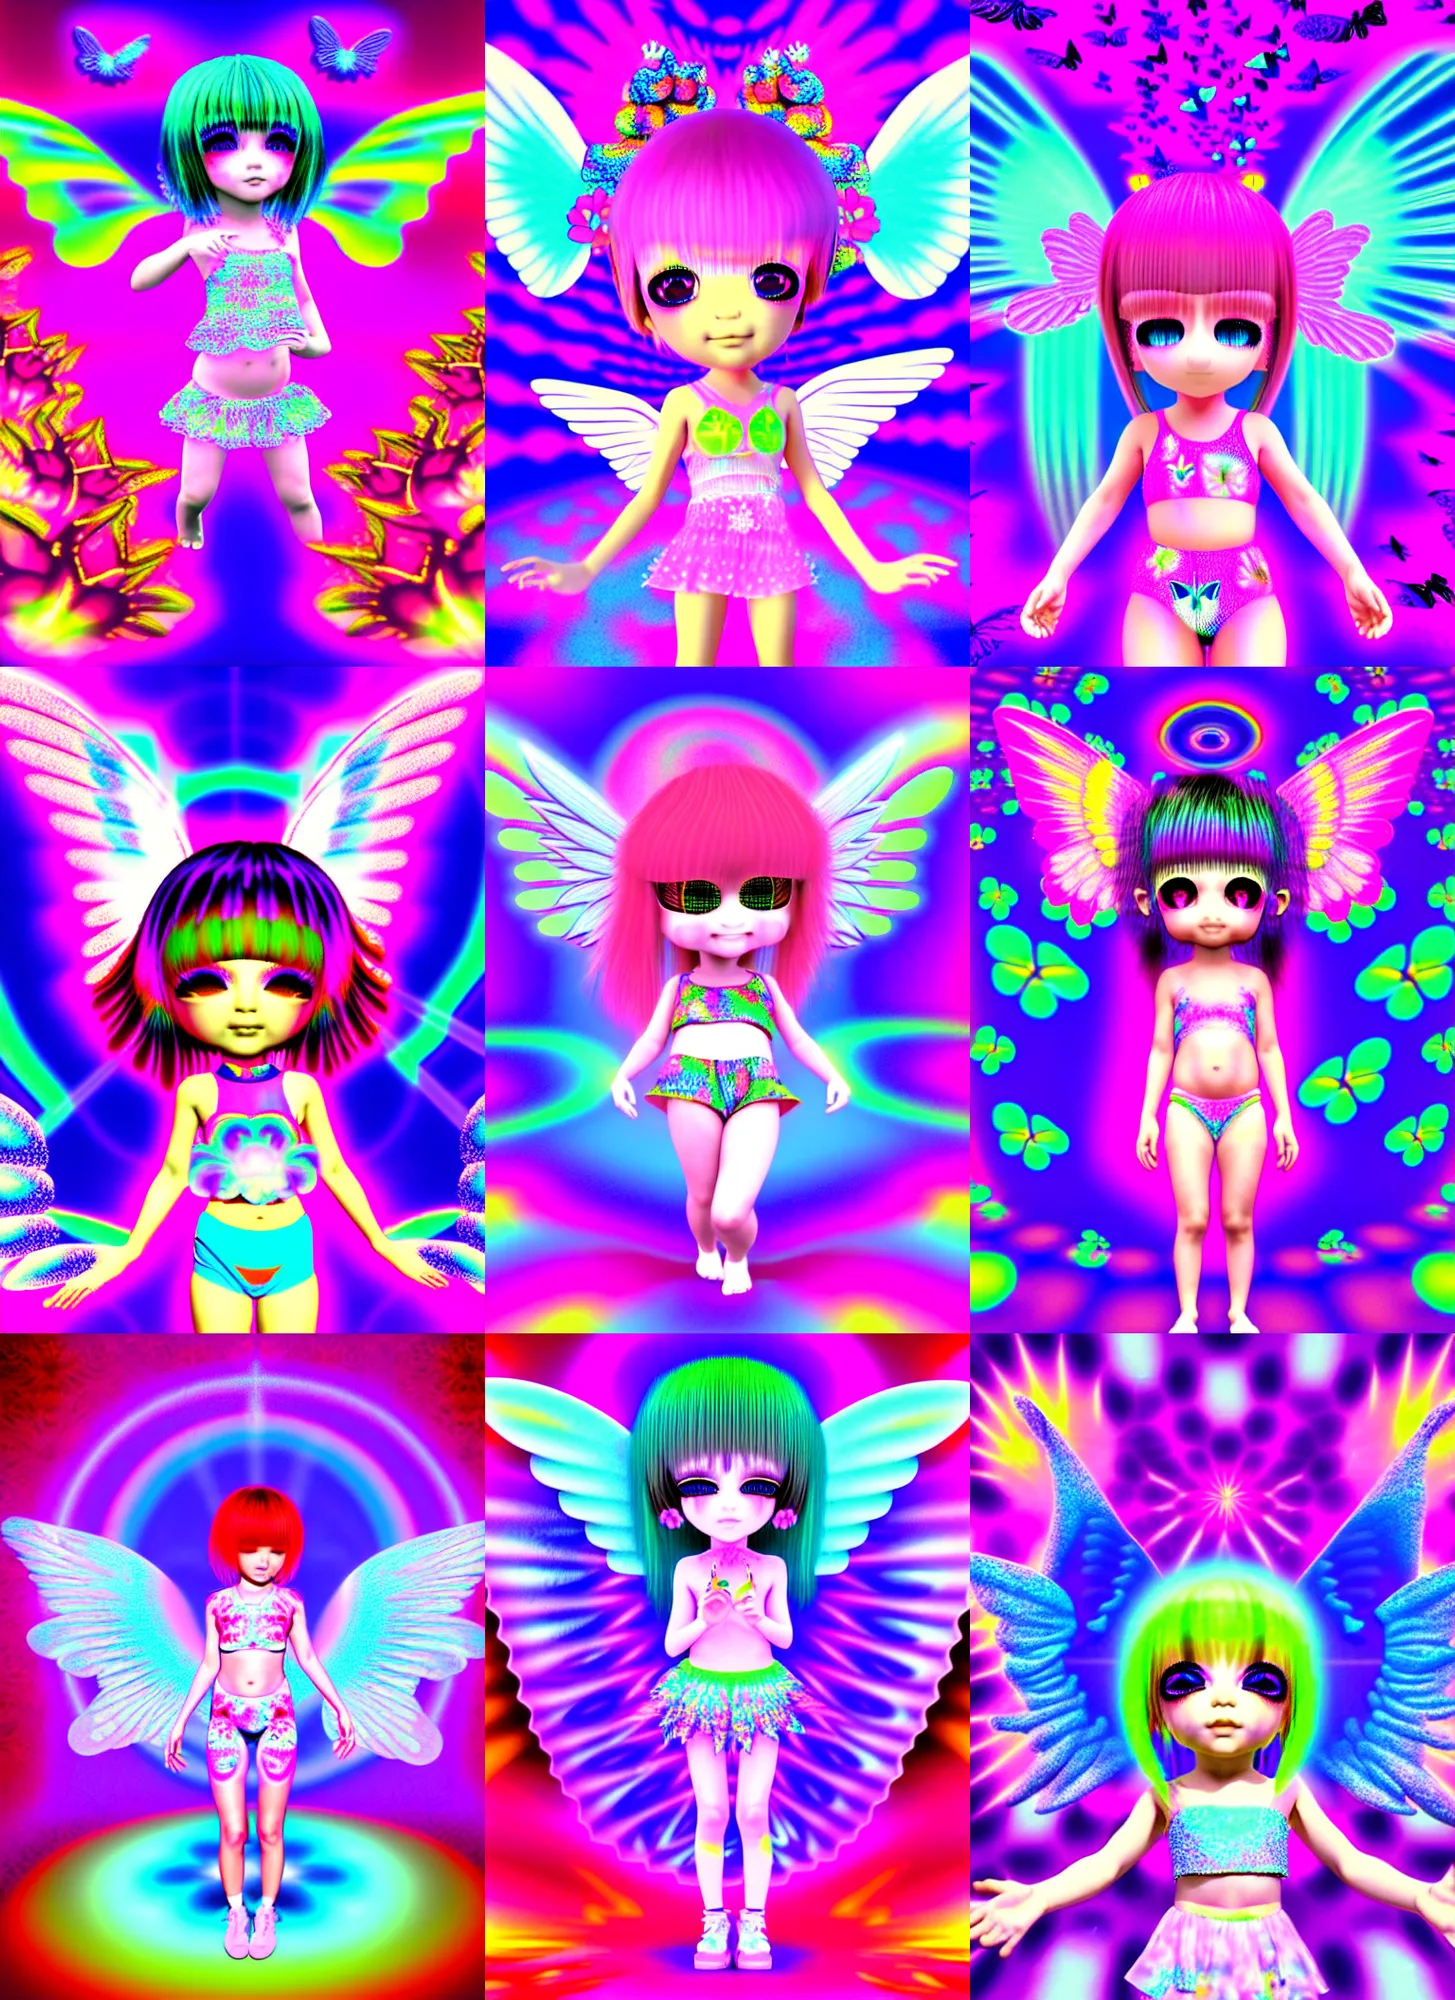 Prompt: 3d render of chibi rave flower baby by Ichiro Tanida wearing angel wings against a psychedelic swirly background with 3d butterflies and 3d flowers n the style of 1990's CG graphics 3d rendered y2K aesthetic by Ichiro Tanida, 3DO magazine